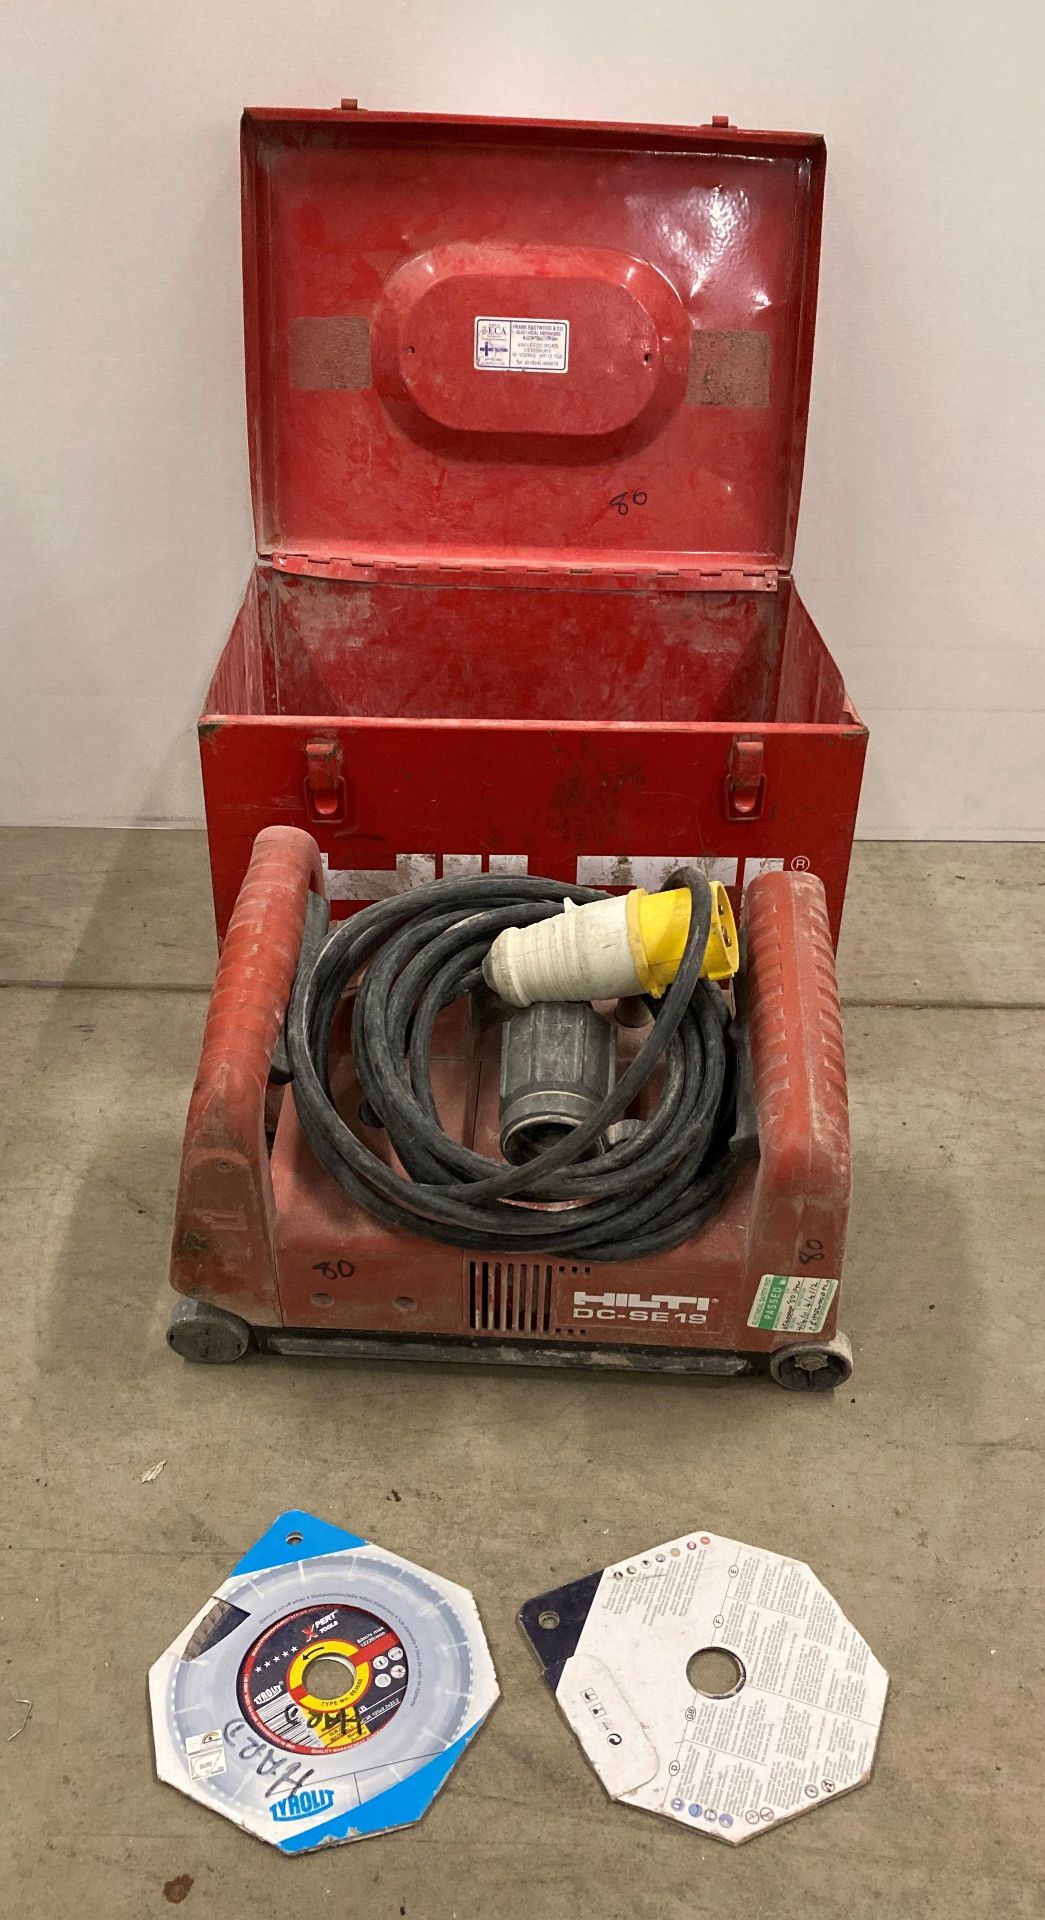 HILTI DCSE19 125MM TWIN BLADER CHASER WITH EXTRACT 110V (saleroom location: J08)